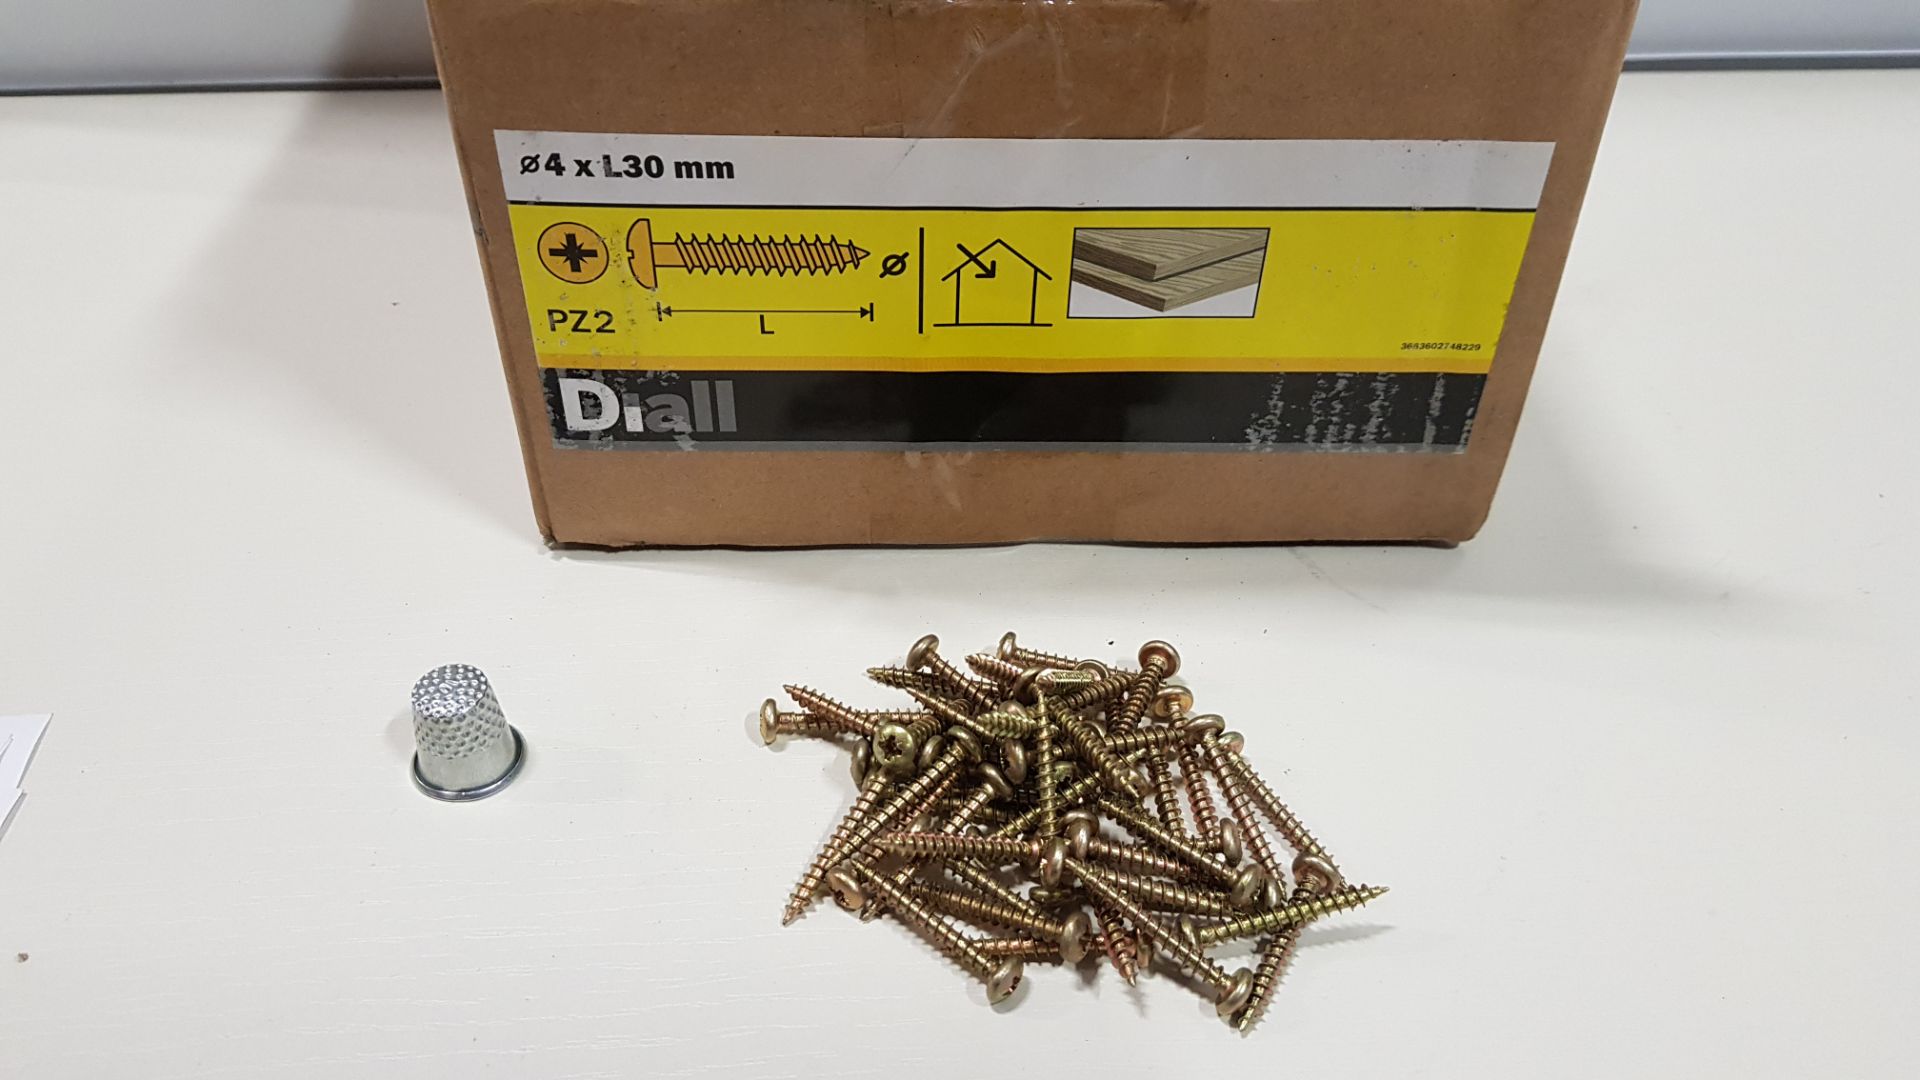 55,500 X BRAND NEW WOOD SCREW PAN YZP 4 X 30 LOOSE IN 30 BOXES